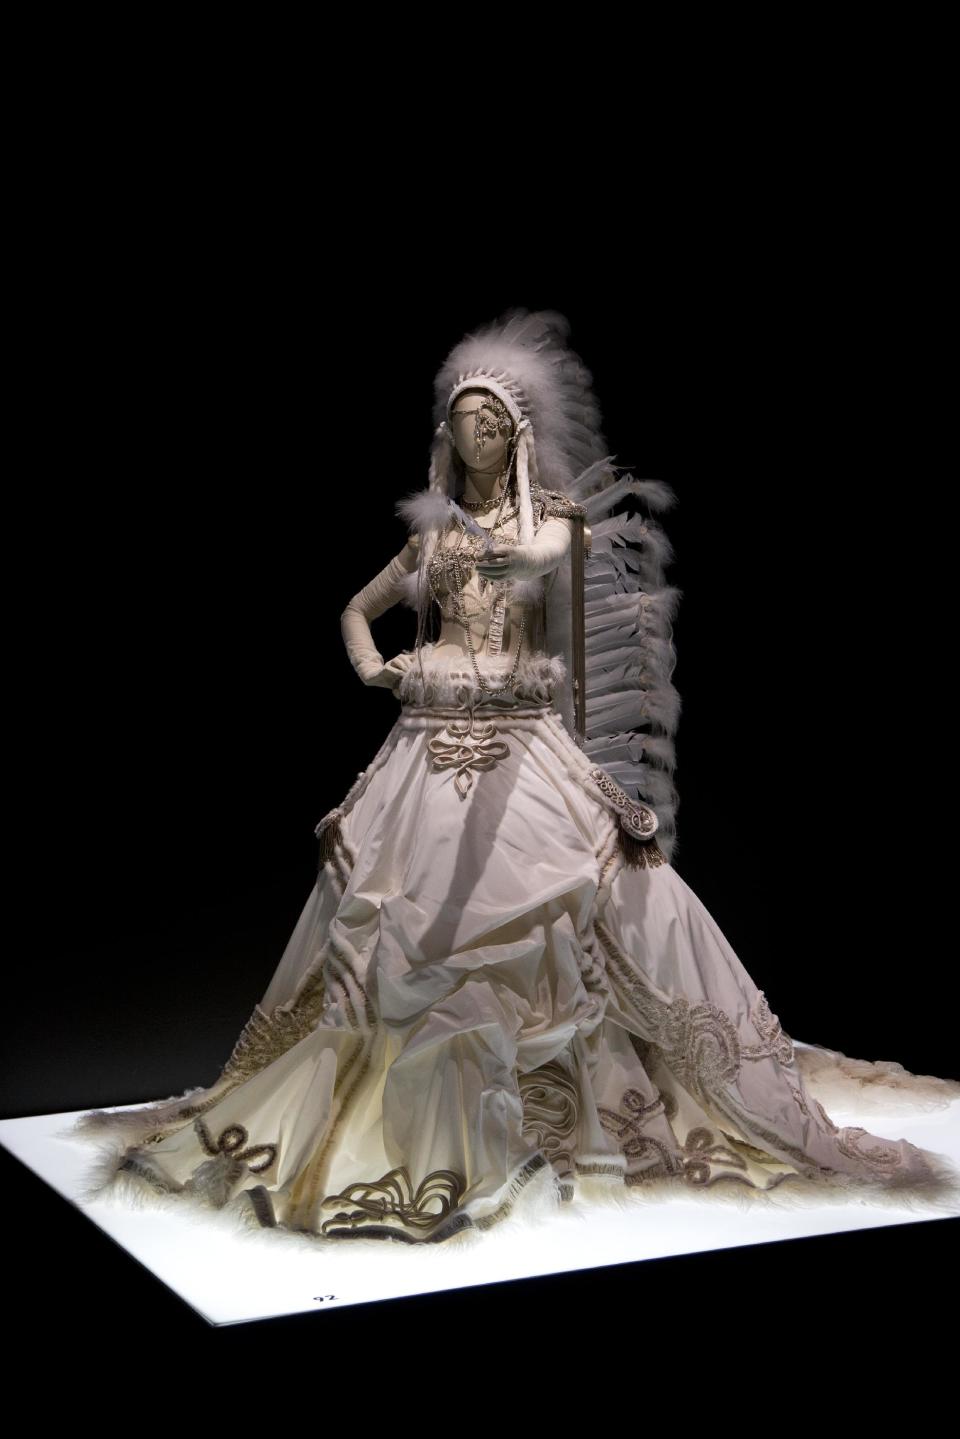 A wedding dress by French fashion designer Jean Paul Gaultier is displayed at the opening of his exhibit "The Fashion World of Jean Paul Gaultier", from the sidewalk to the catwalk, at Kunsthal museum in Rotterdam, Netherlands, Friday Feb. 8, 2013. The exhibit opens to the public on Feb. 10, 2013. (AP Photo/Peter Dejong)